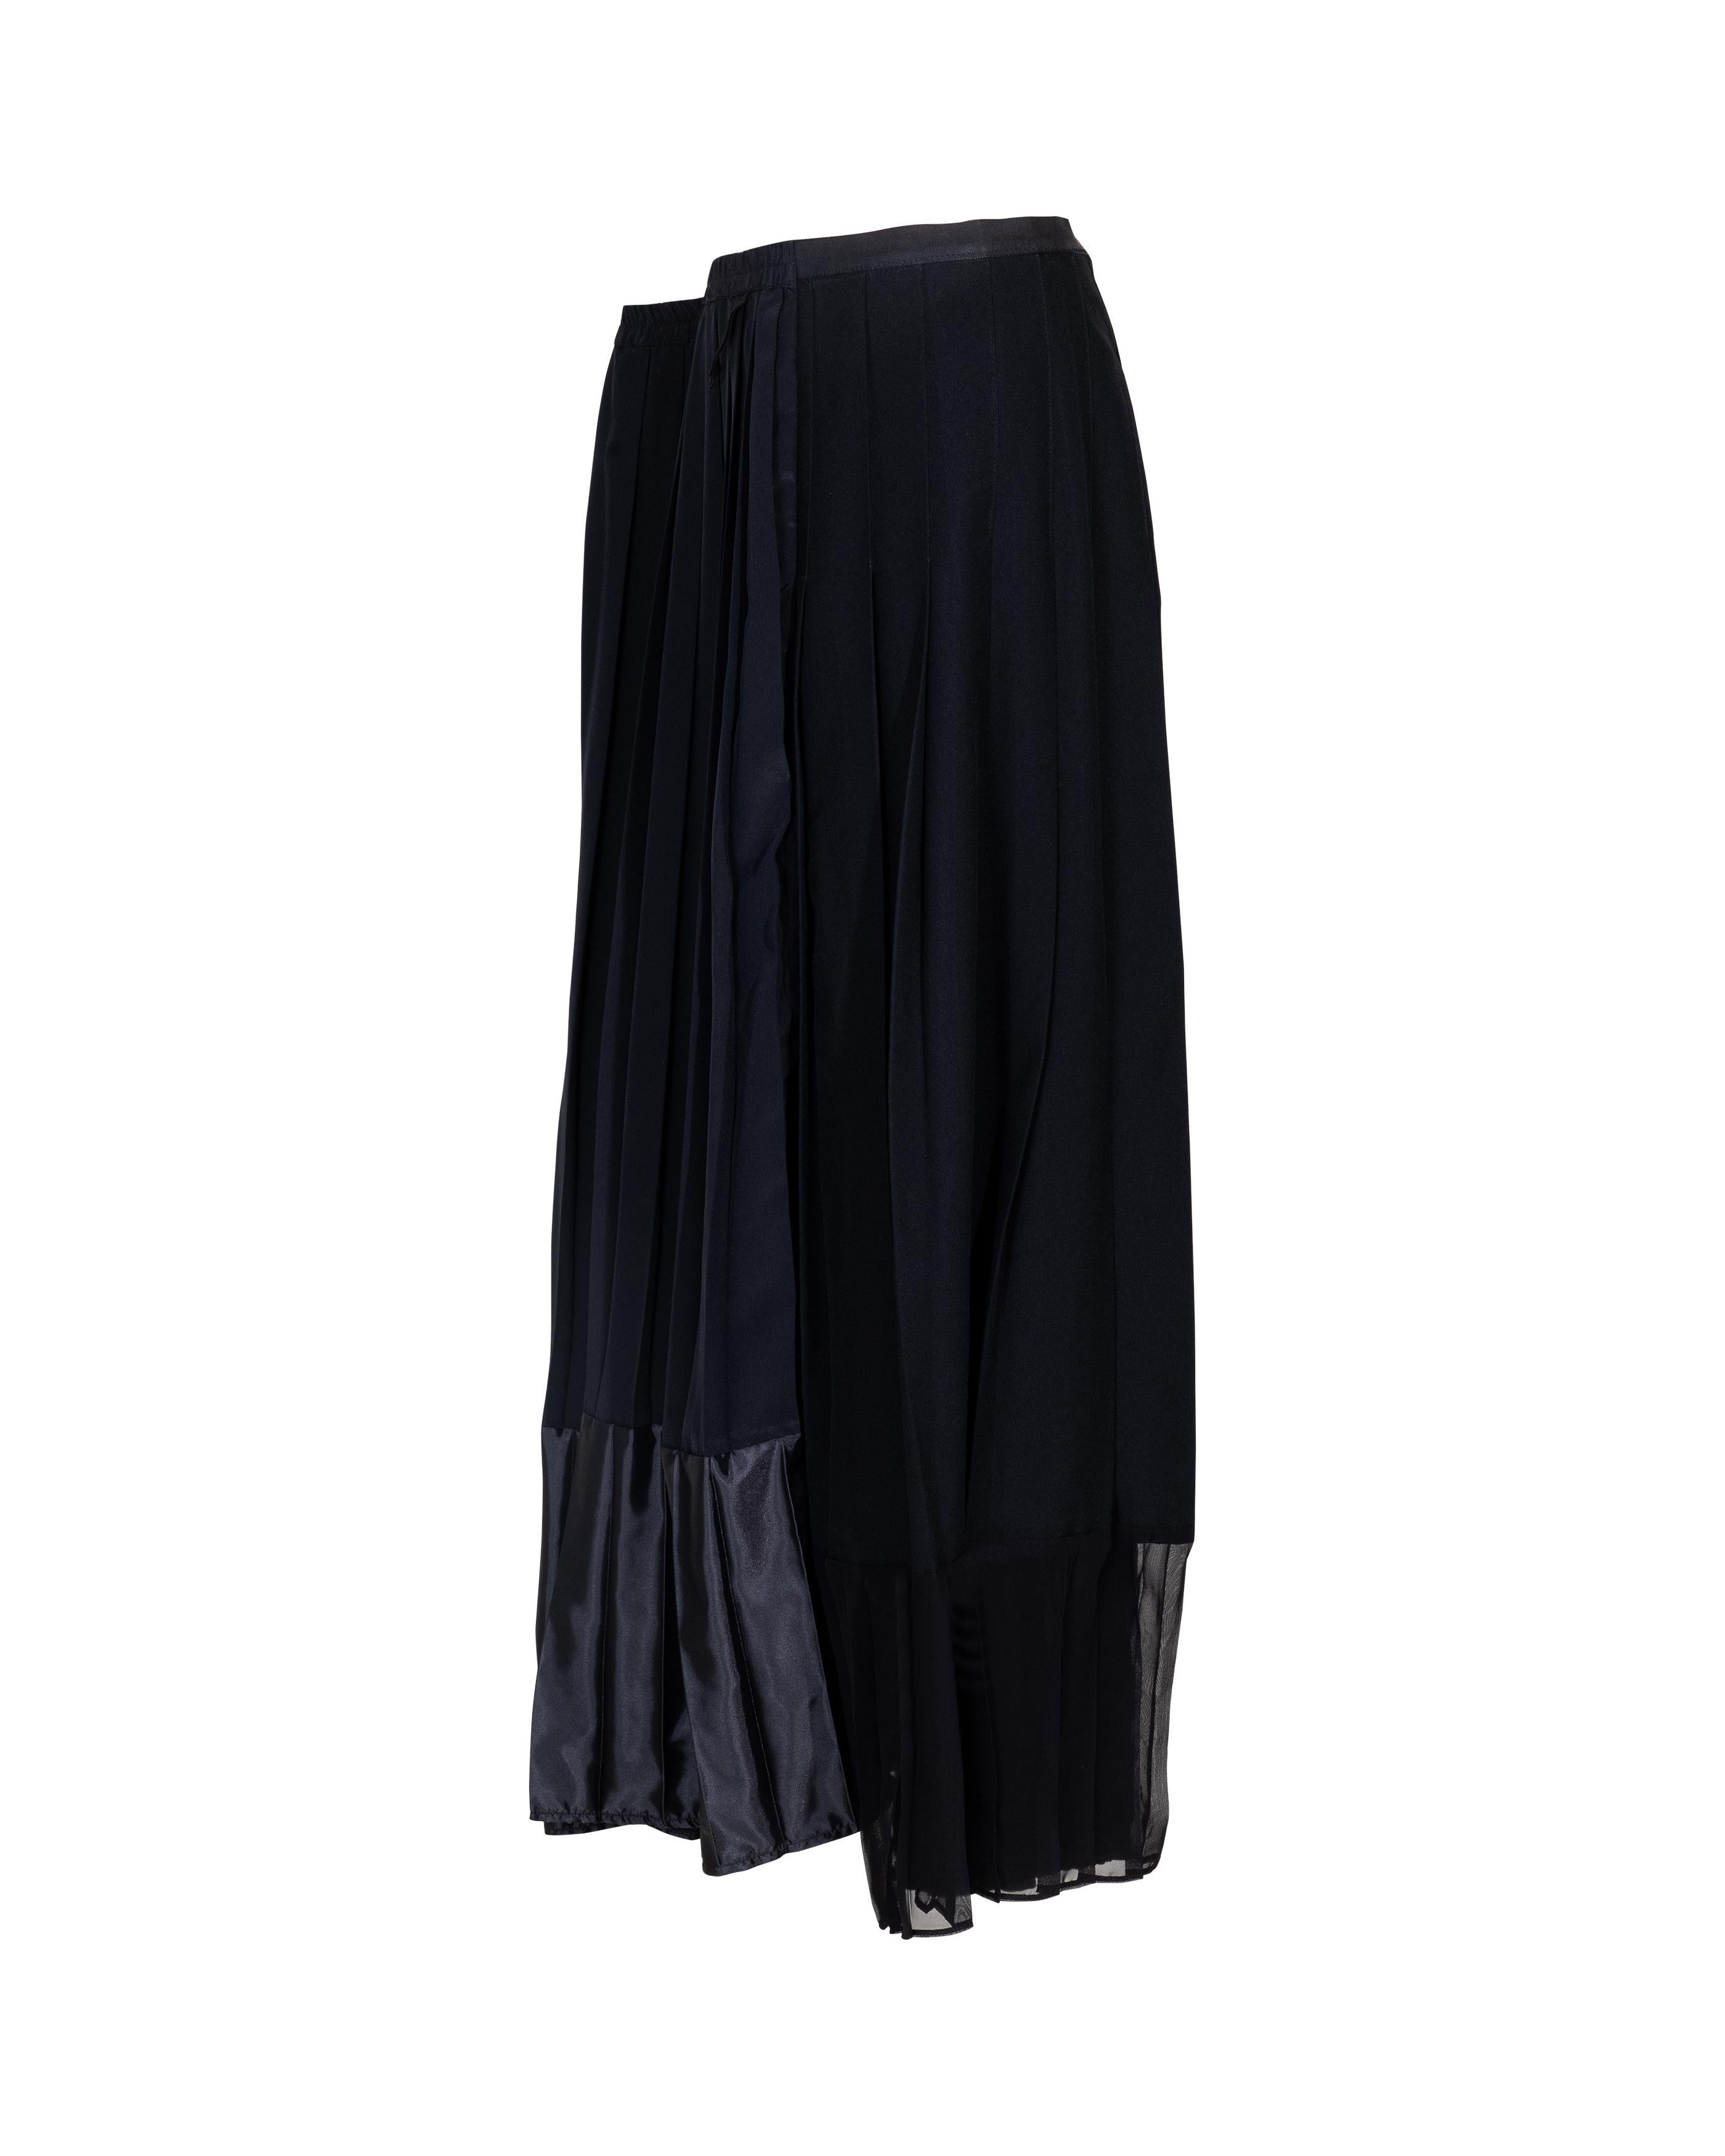 S/S 2001 Maison Martin Margiela One-of-One Black Pleated Artisanal Maxi Skirt In New Condition For Sale In North Hollywood, CA